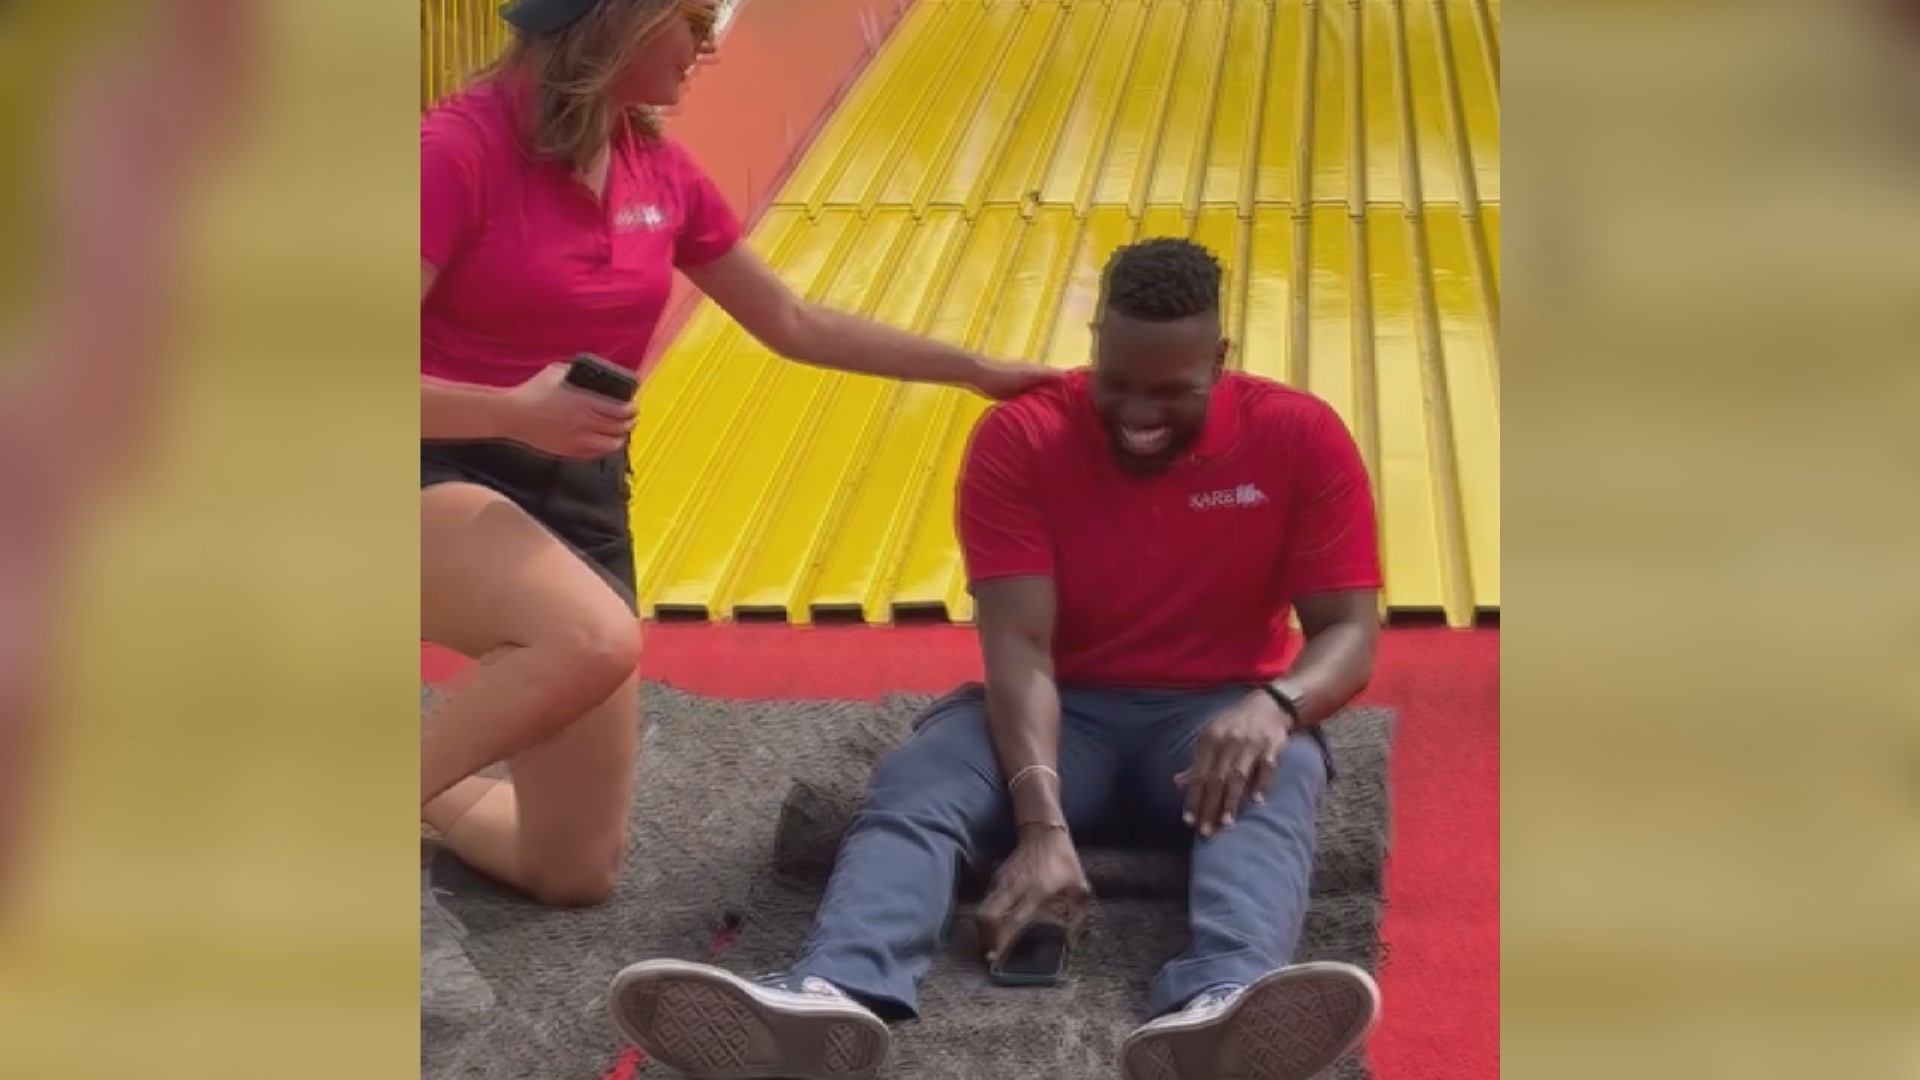 KARE 11 Sunrise anchors Jason Hackett and Alicia Lewis ride the Giant Slide at the Minnesota State Fair.